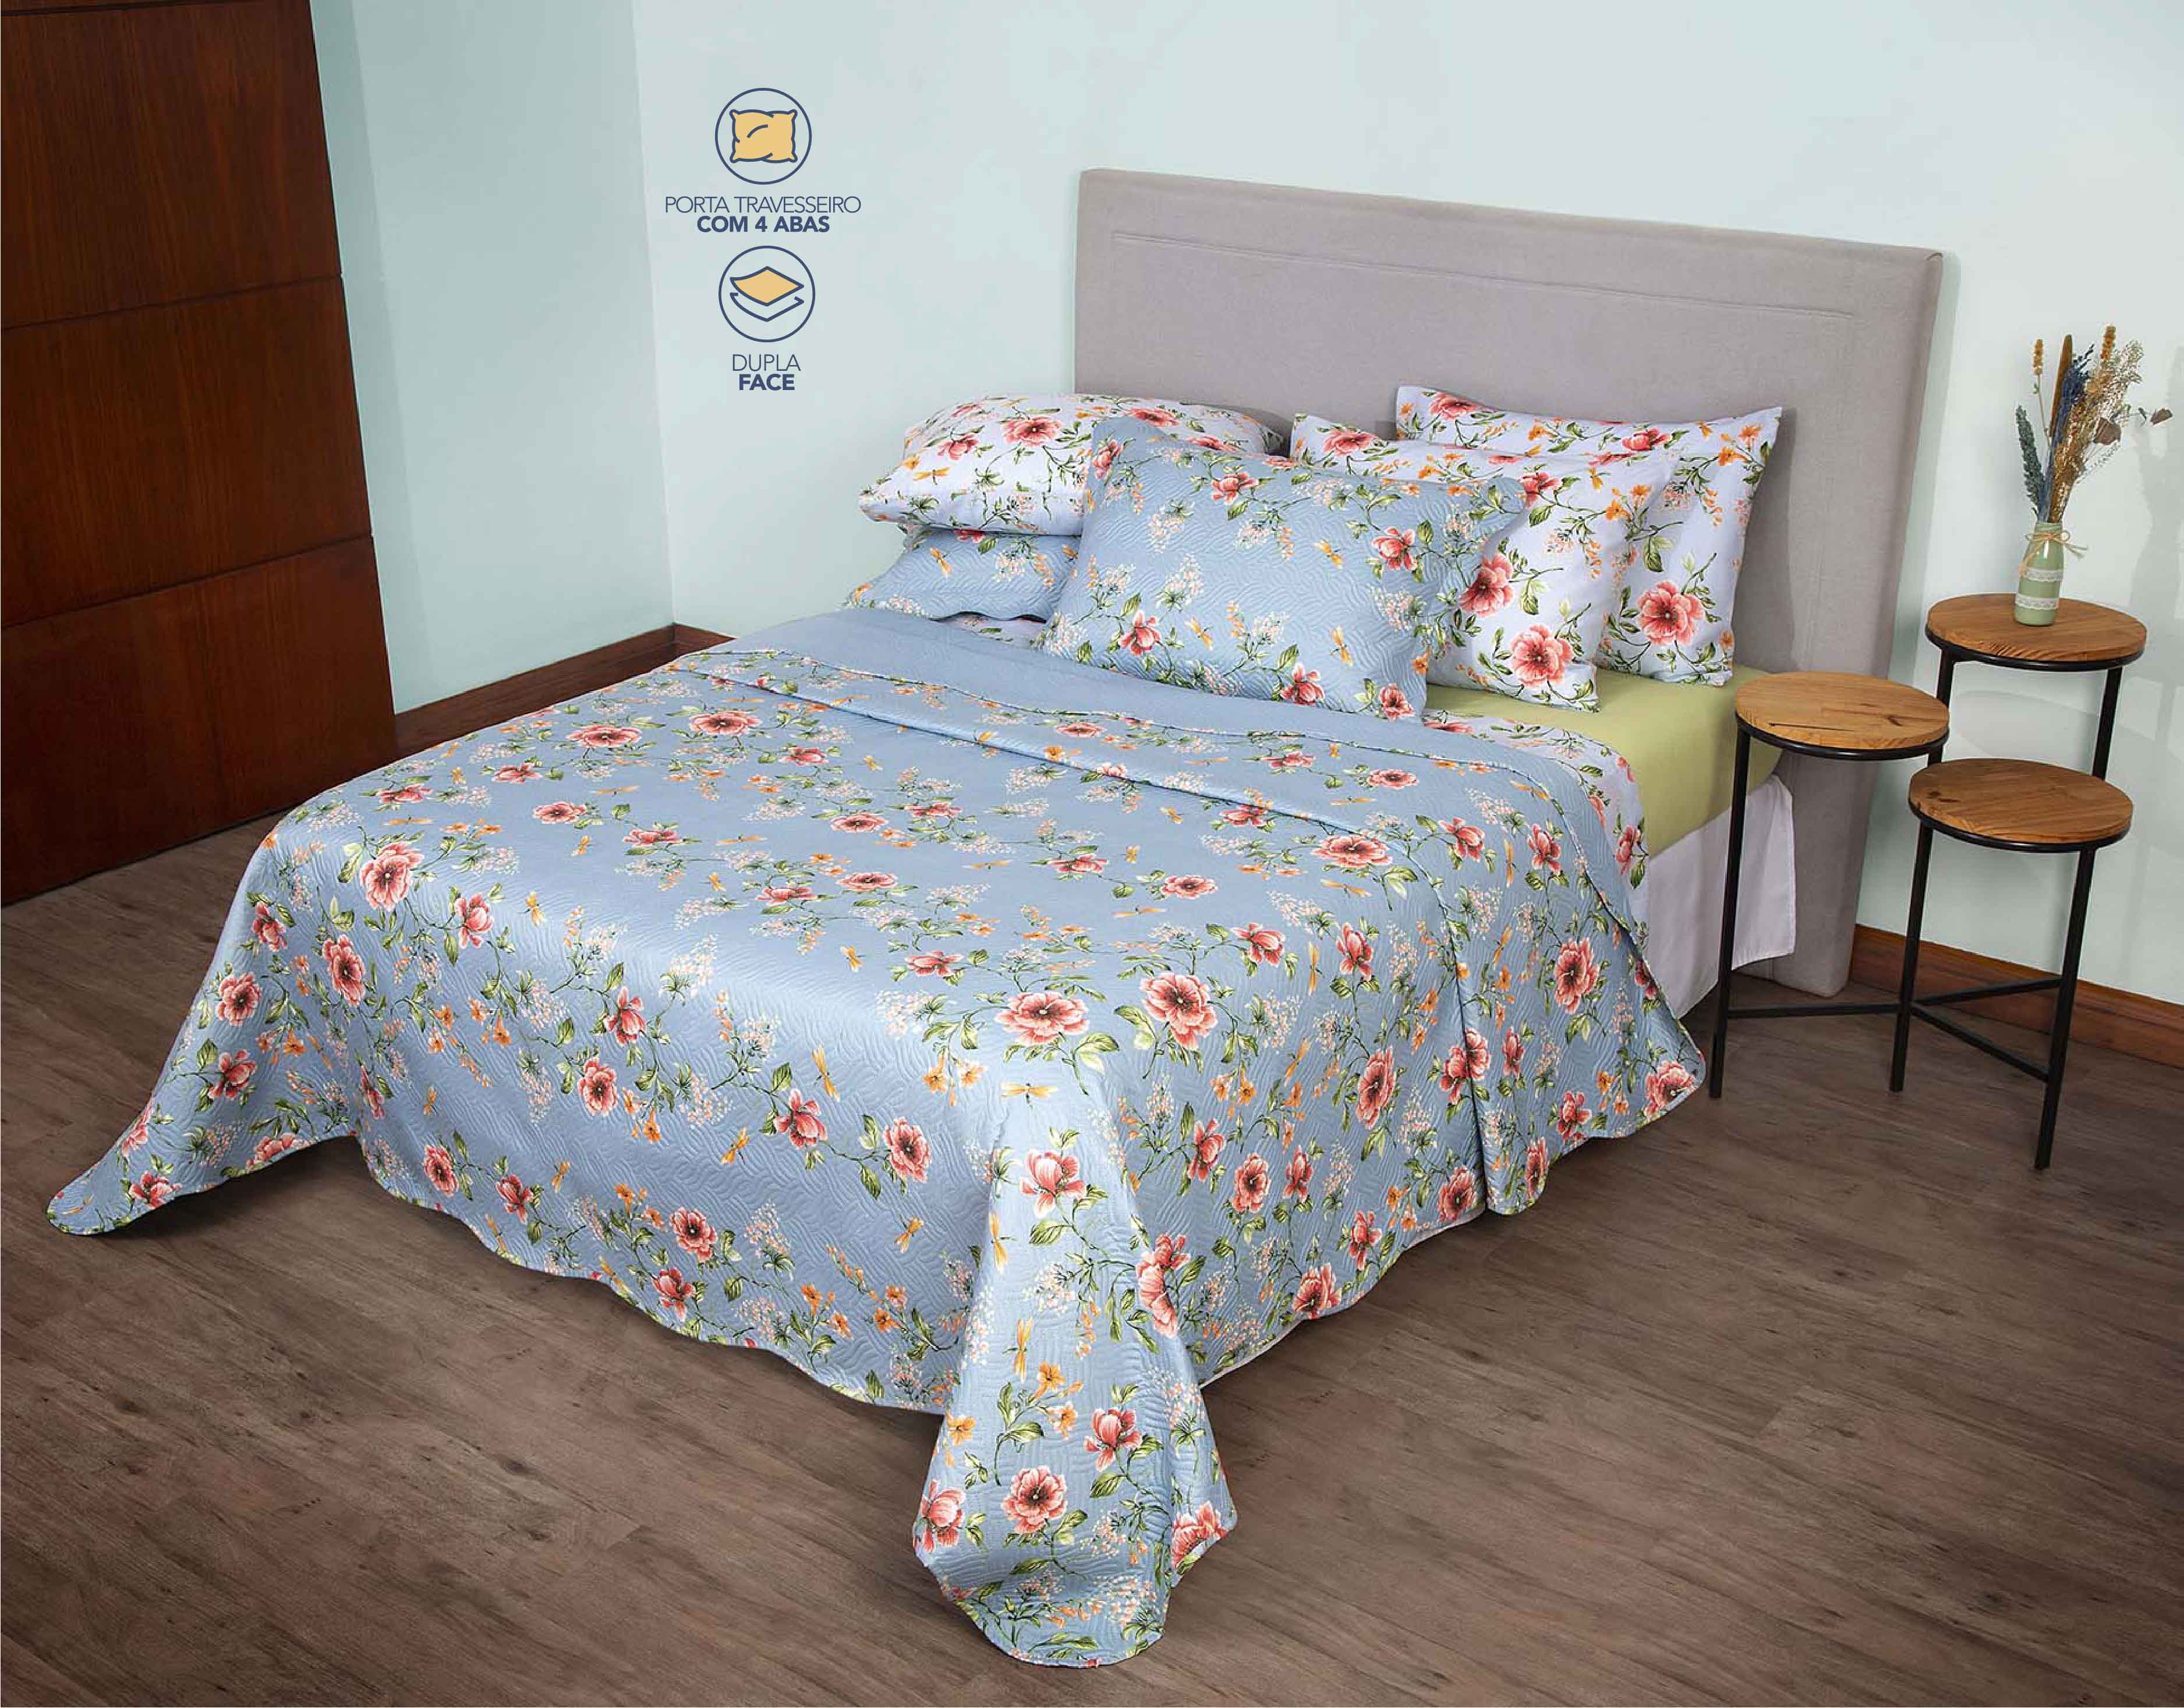 Olinda Double-Face Bed Spread Printed with 2 pieces